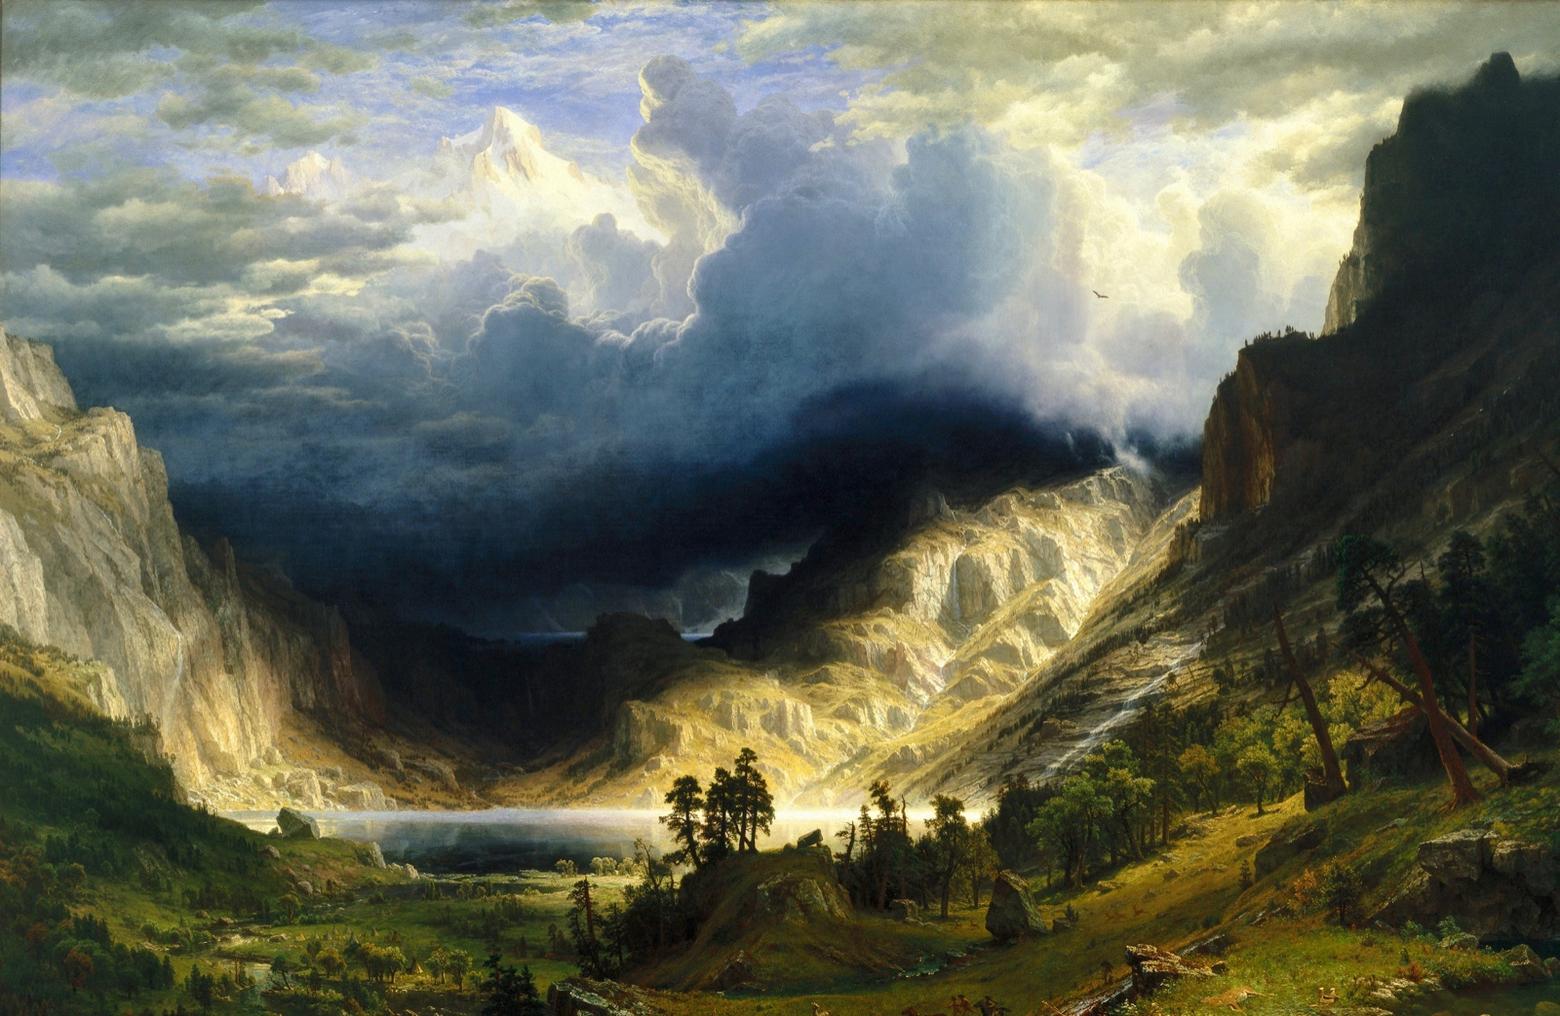 One of Albert Bierstadt's masterworks "Among Sierra Nevada in California."  The painting speaks to both the allure and eternal mystery of the high mountains.